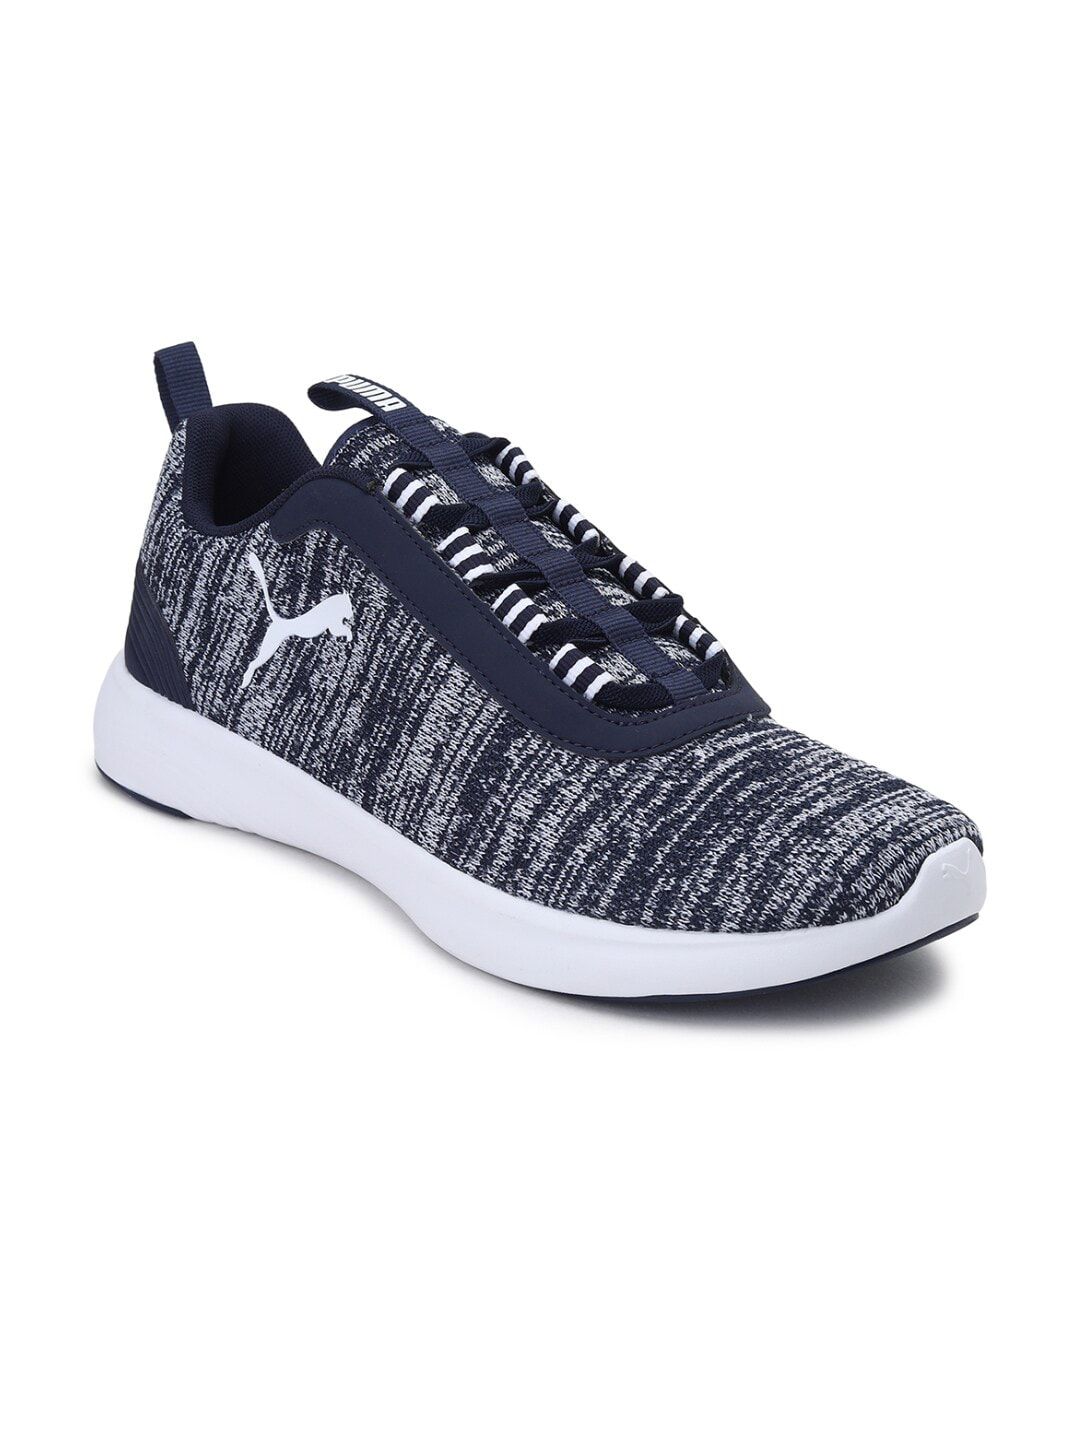 Puma Unisex Navy Blue Softride Vital Textile Walking Shoes Price in India